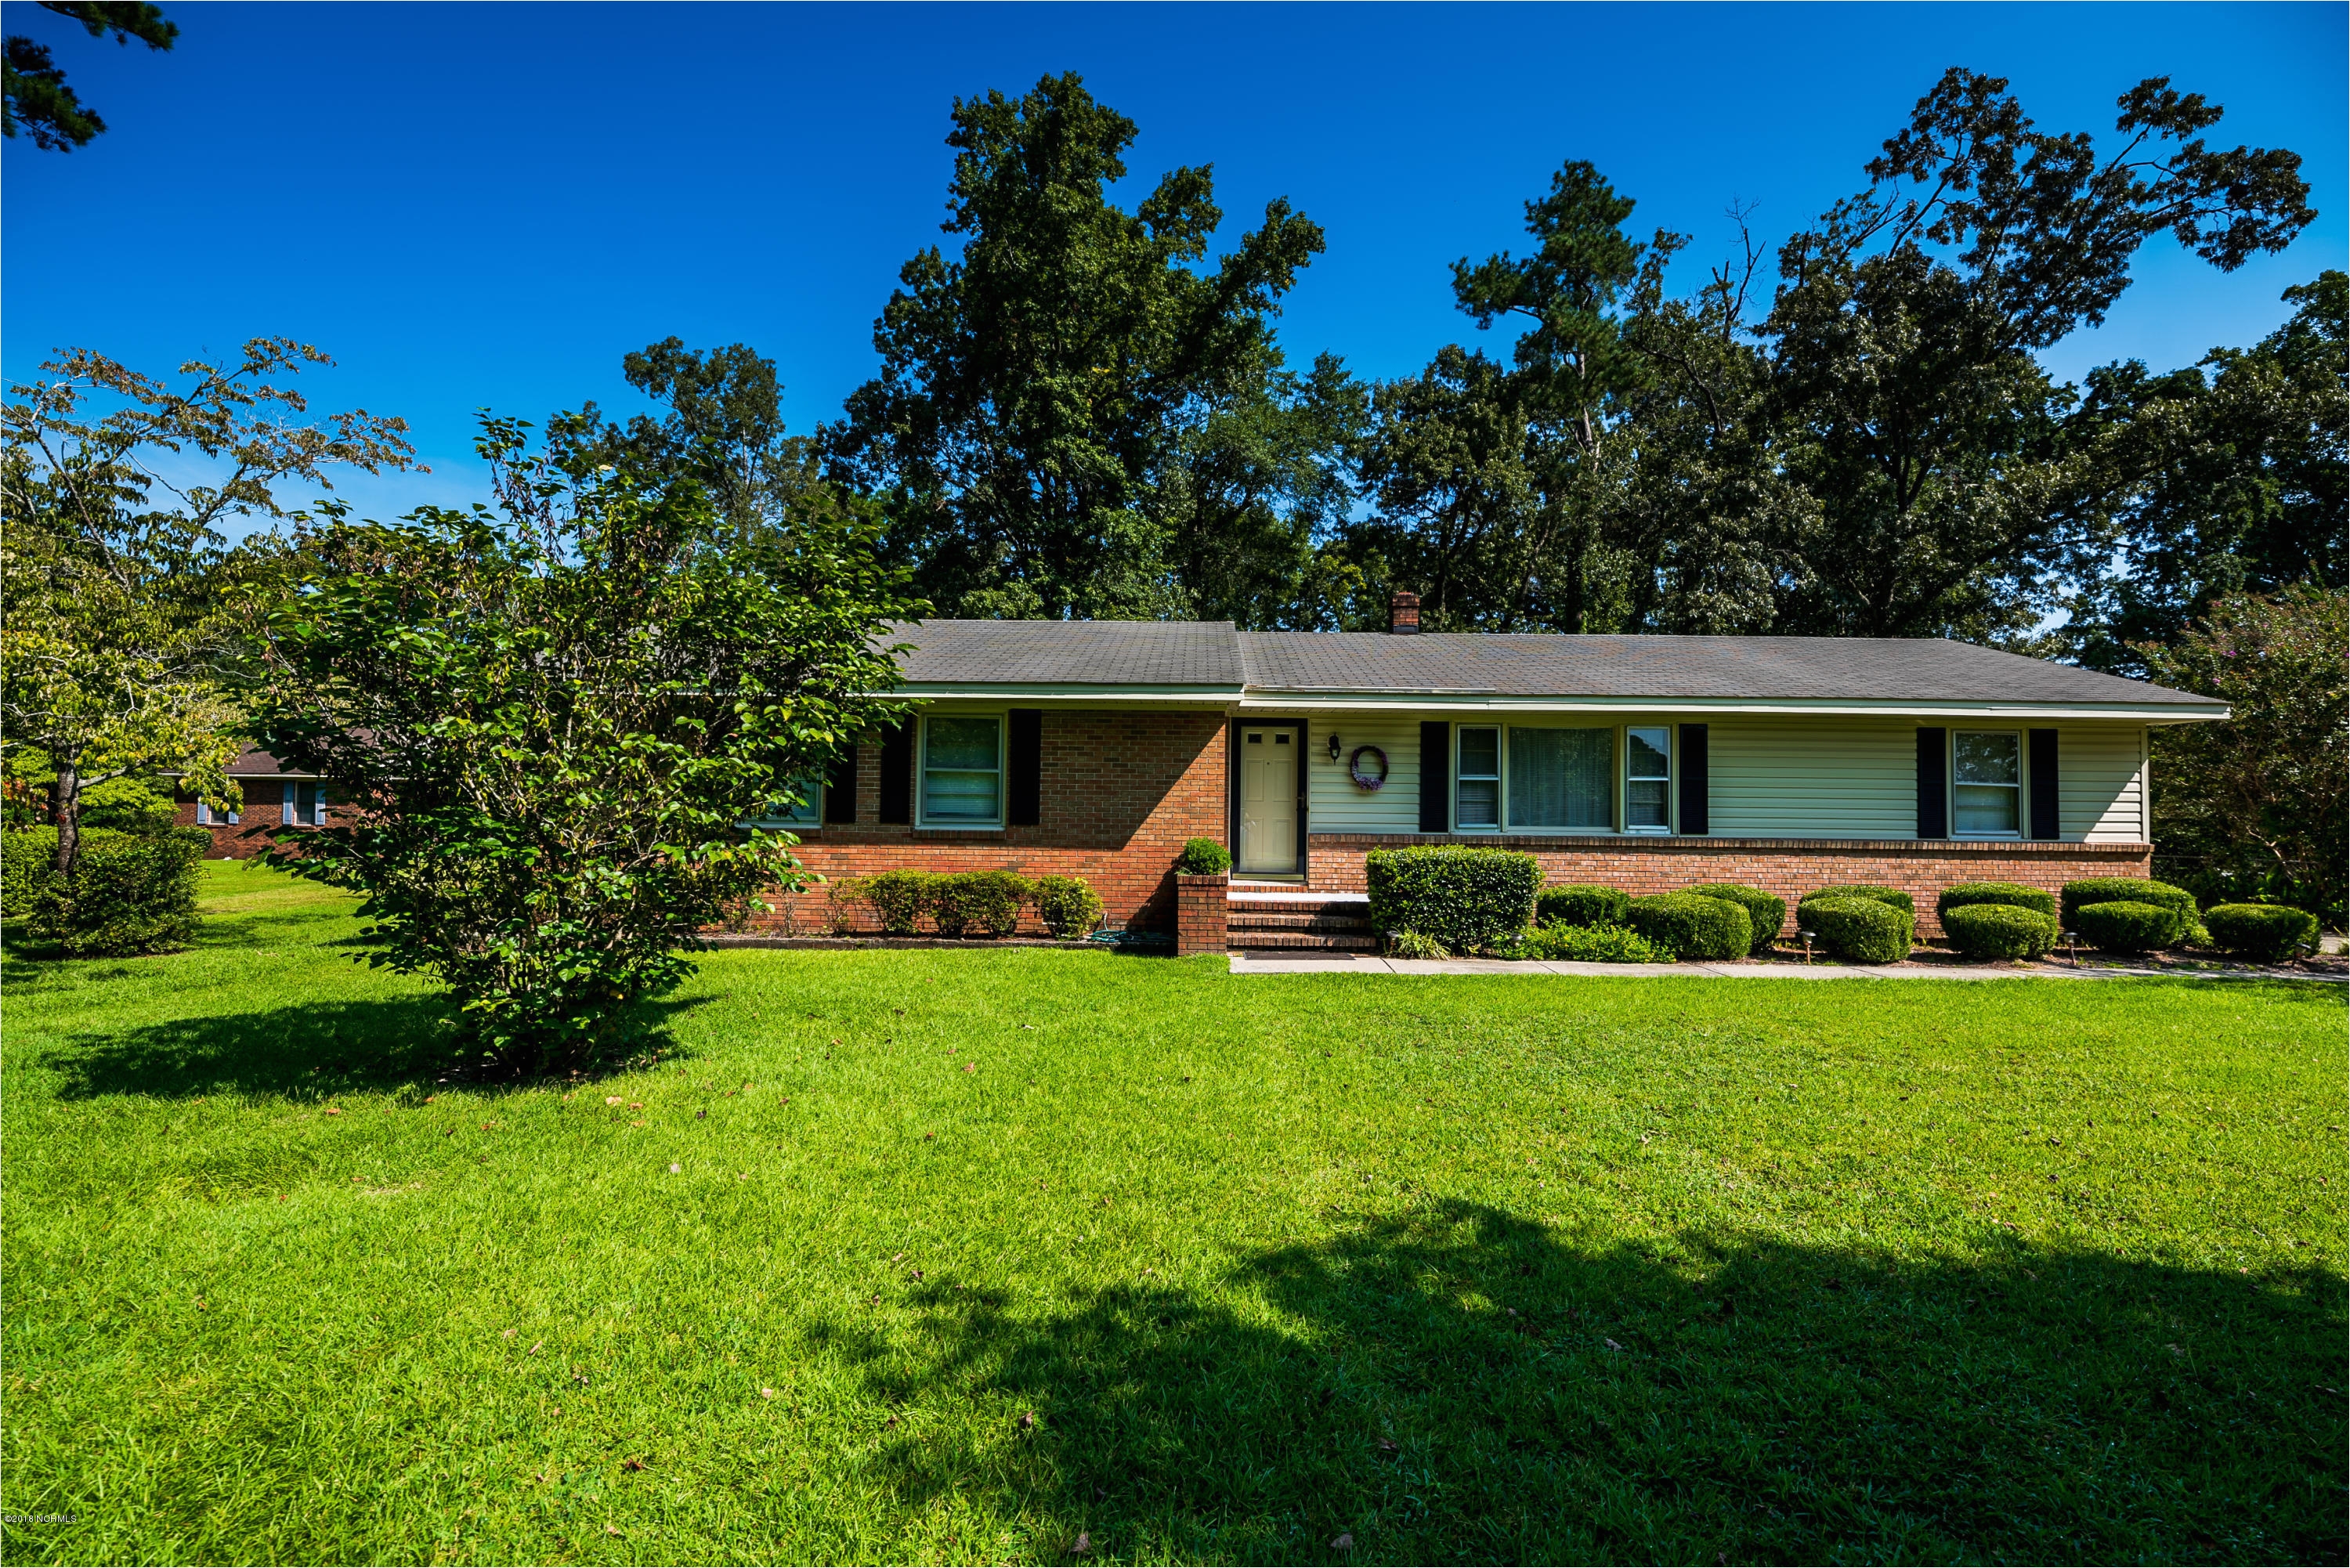 property image of 713 circle drive in new bern nc